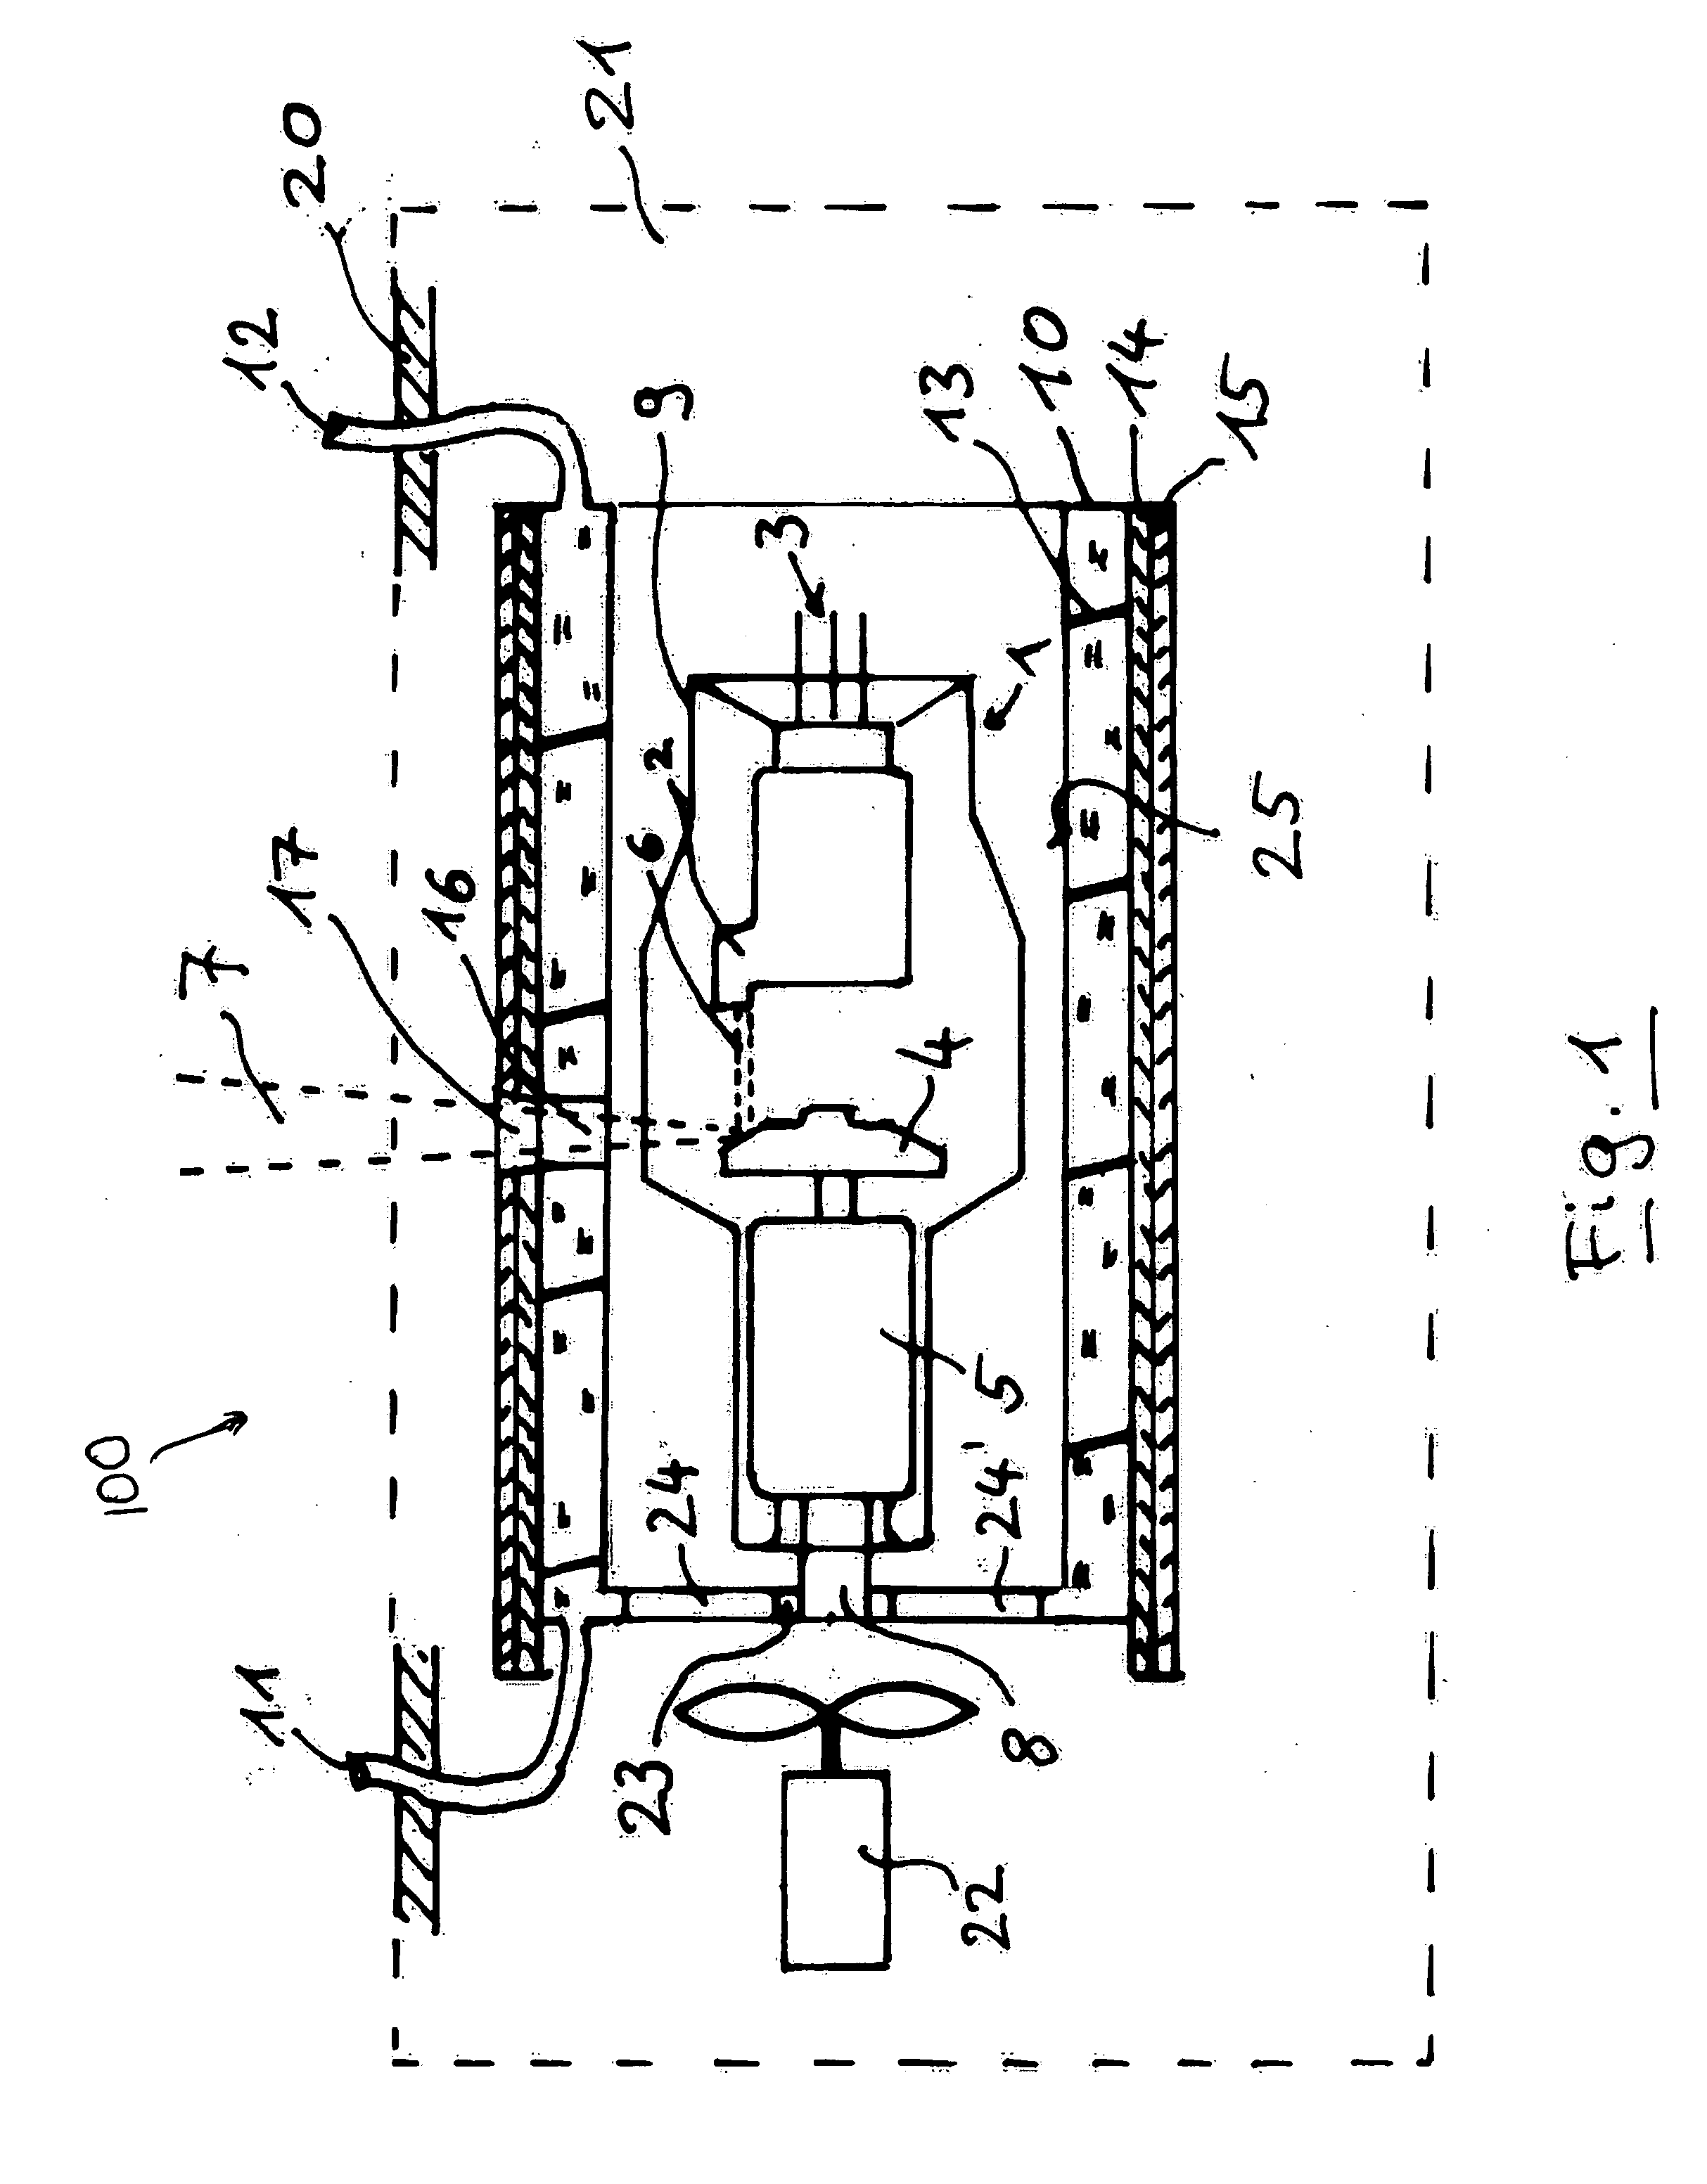 Heat exchanger for a diagnostic x-ray generator with rotary anode-type x-ray tube